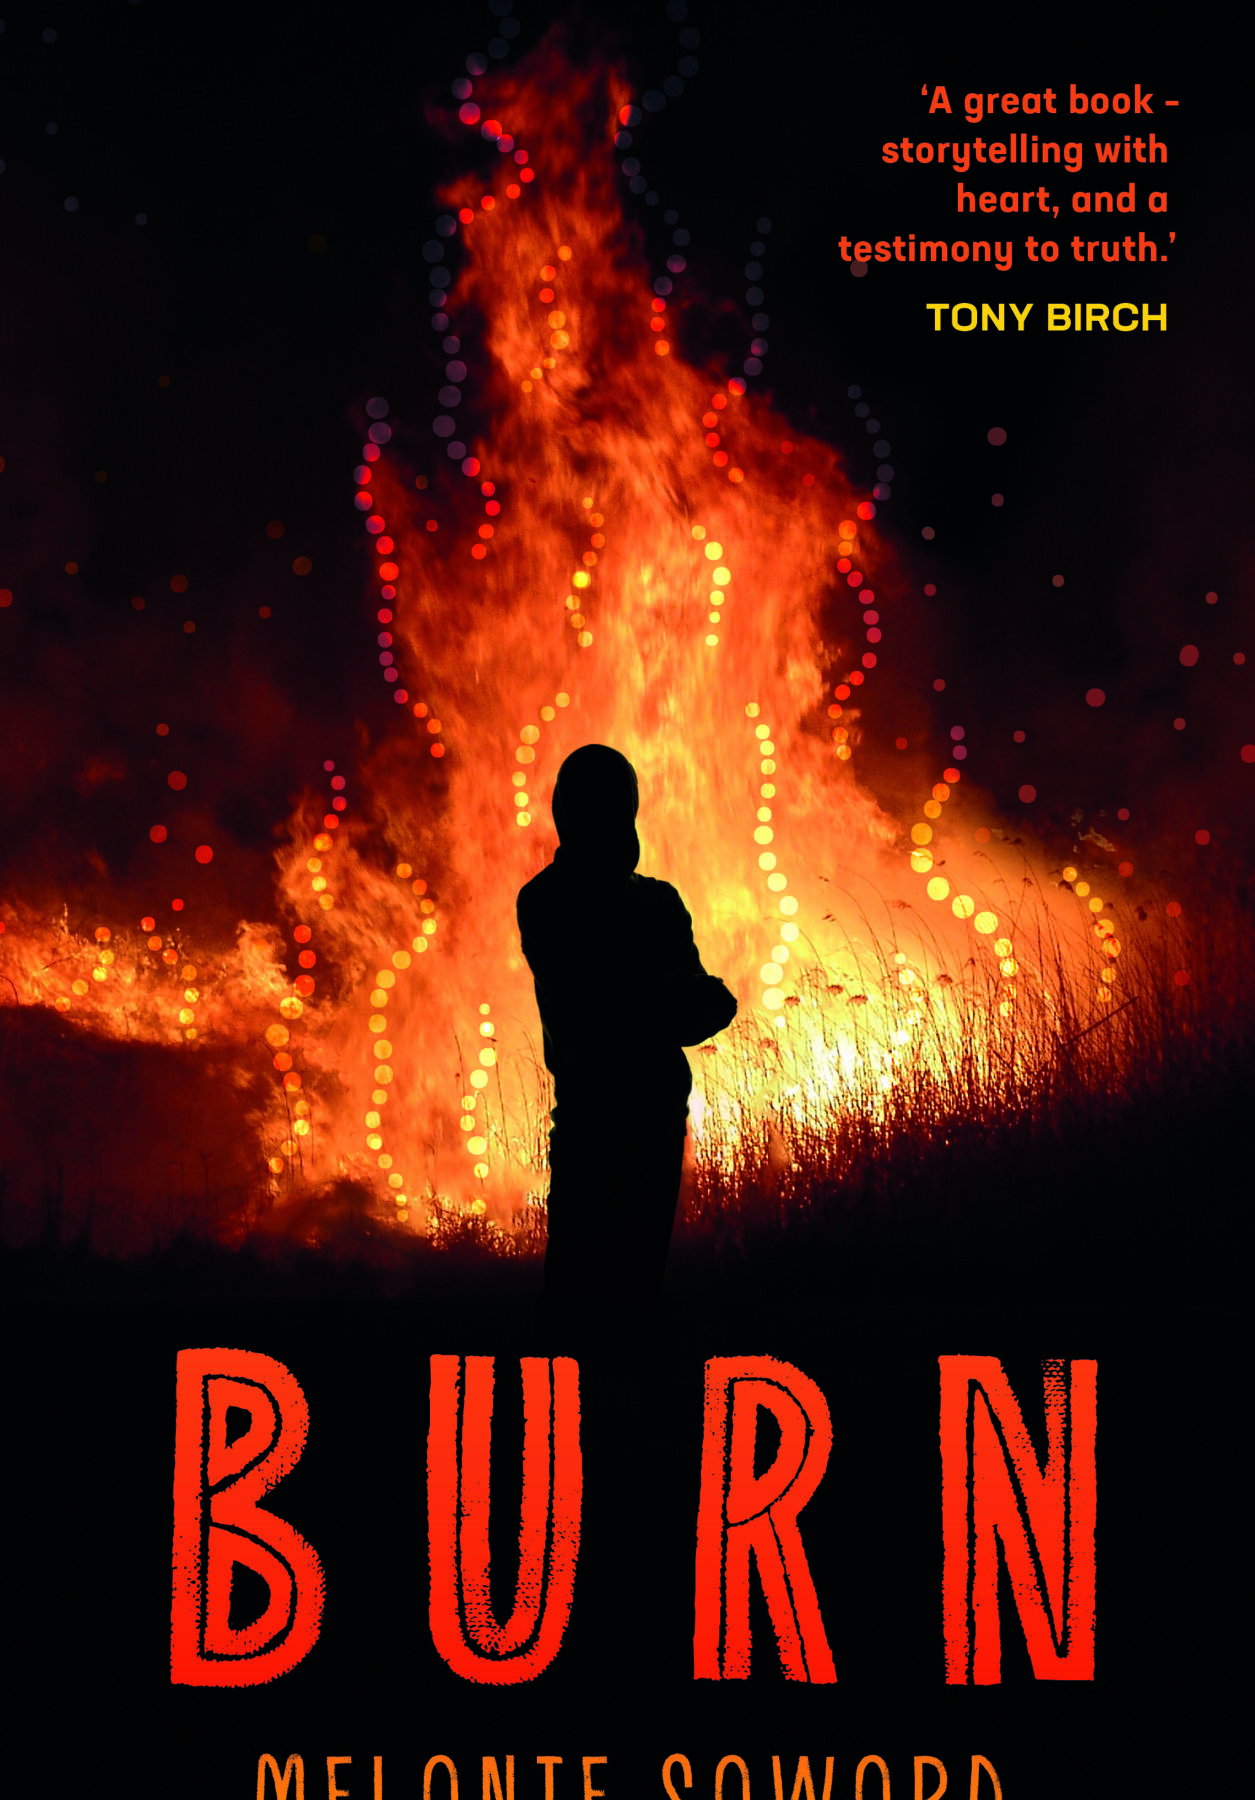 A dark book cover featuring a large flame and a silhouette of someone standing folded-arms in front. The title is in red lettering at the bottom of the page